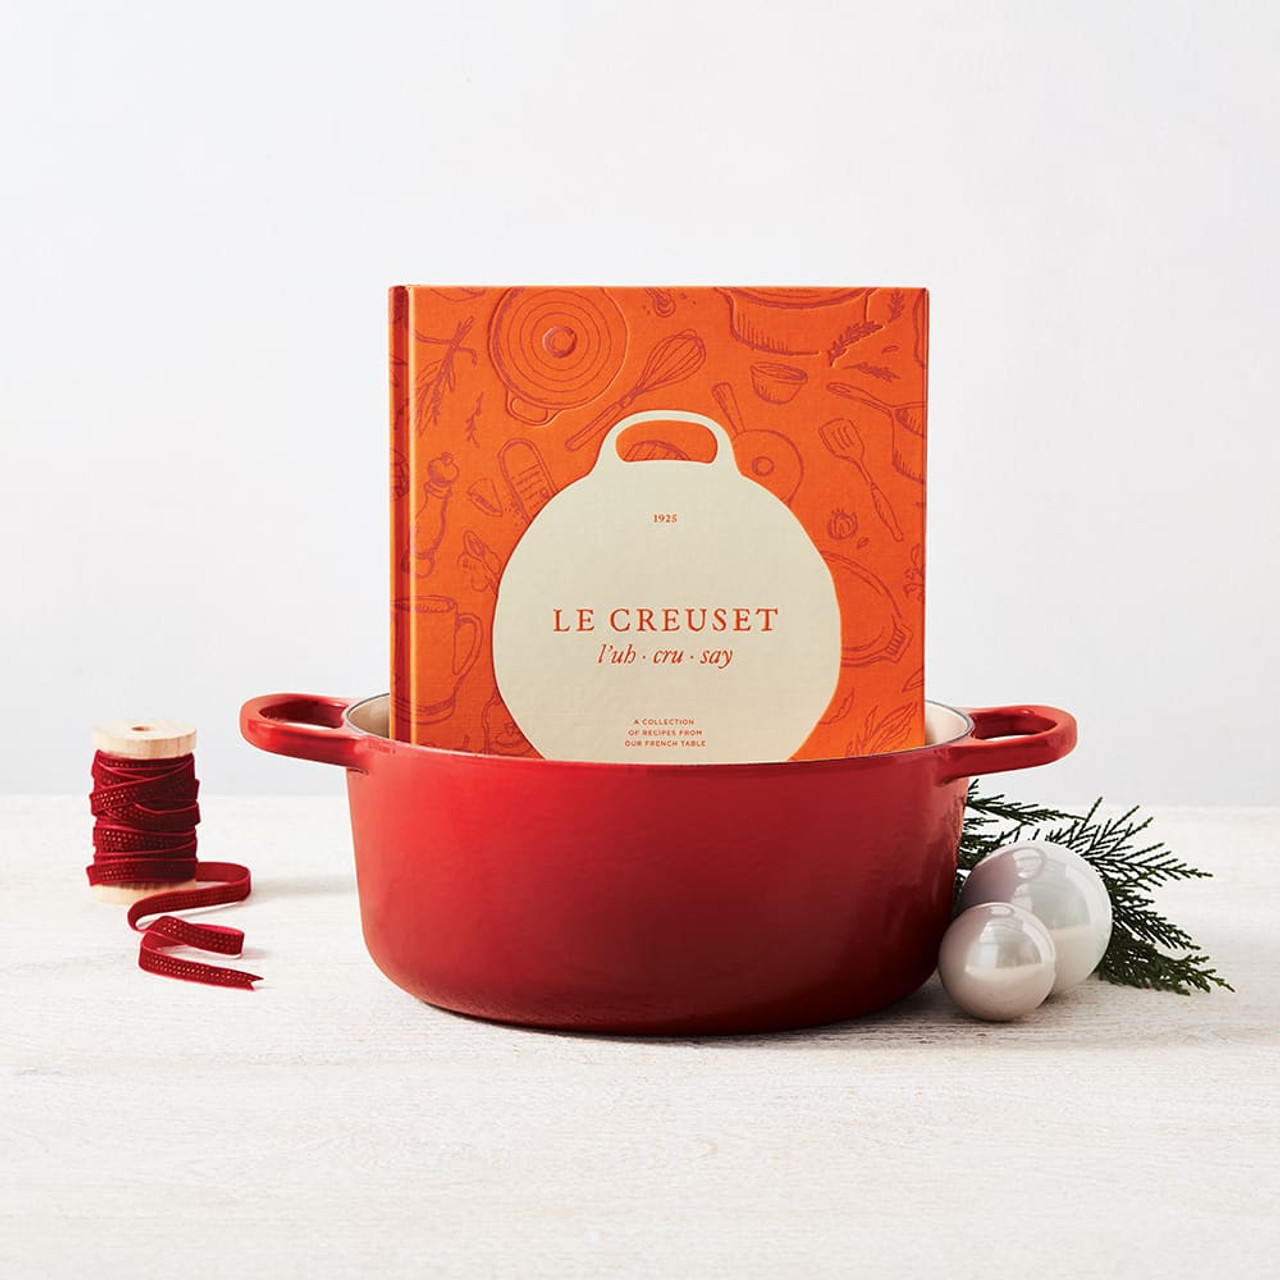 https://cdn11.bigcommerce.com/s-hccytny0od/images/stencil/1280x1280/products/2343/7831/le-creuset-cookbook-2__70382.1551021122.jpg?c=2?imbypass=on